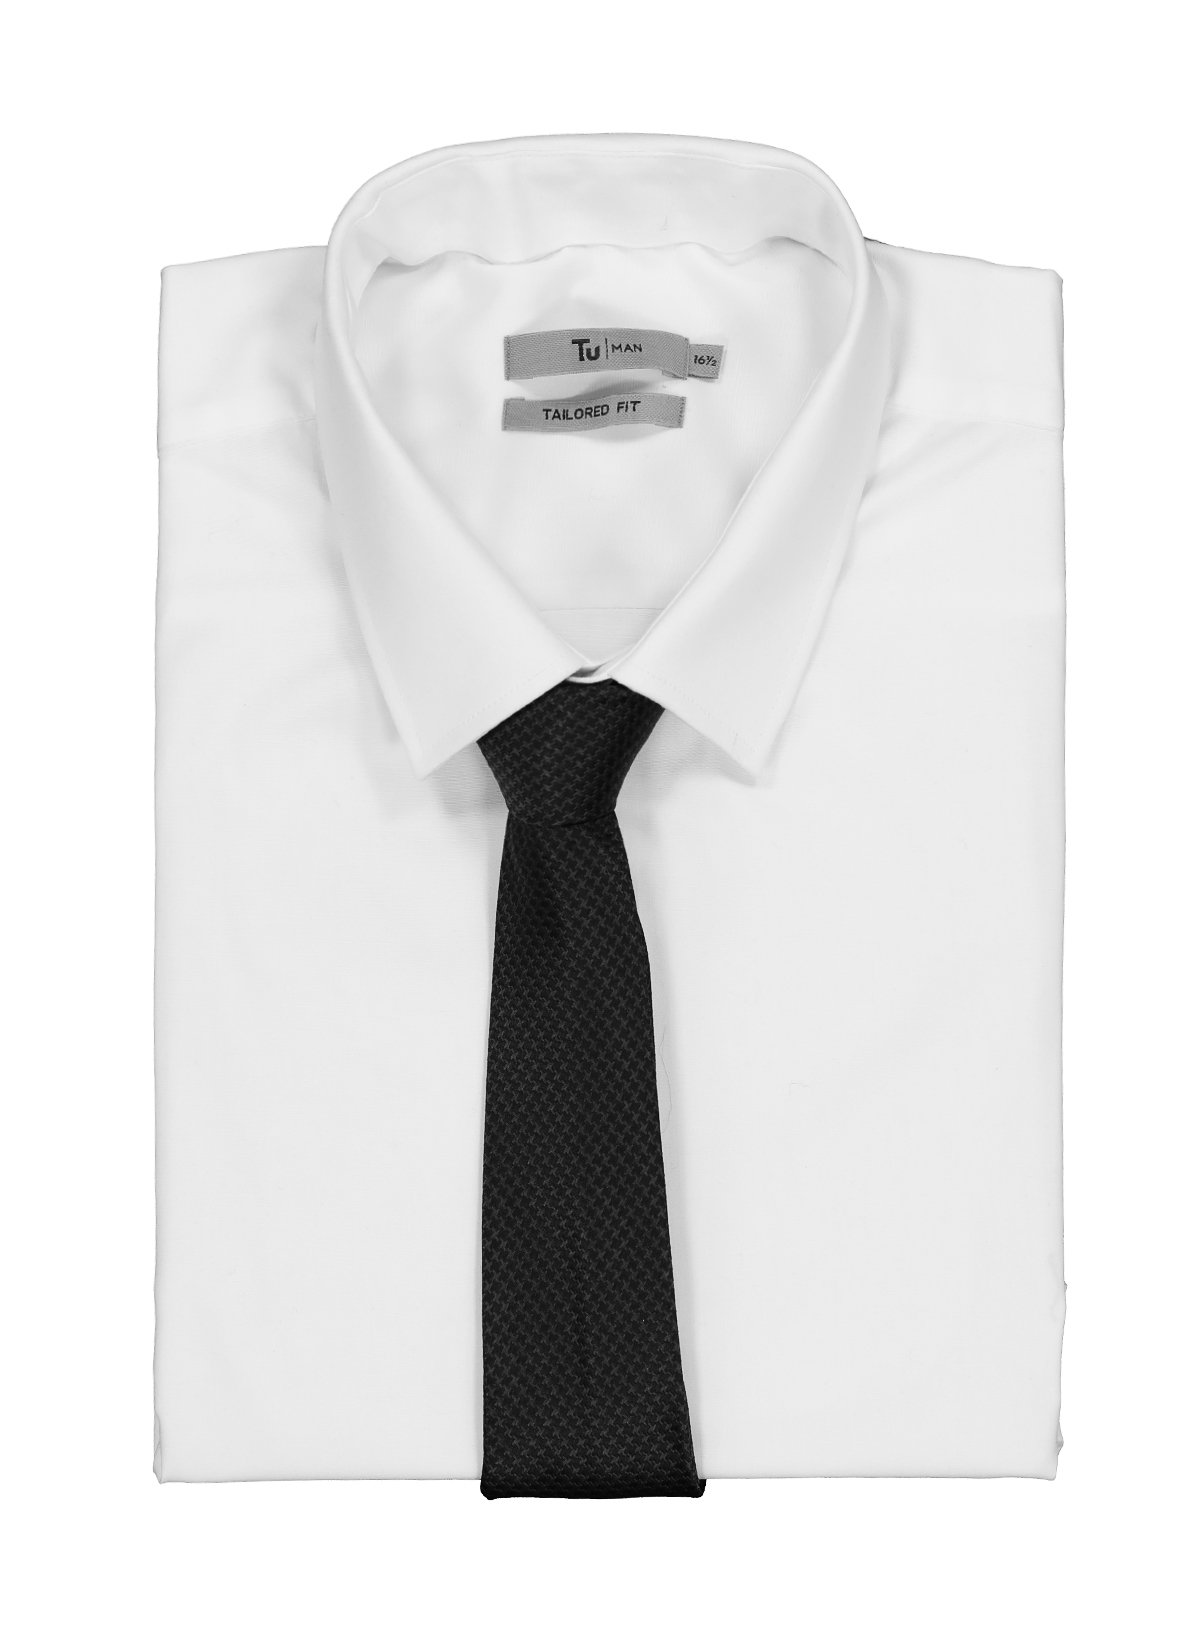 White Tailored Fit Shirt with Black Tie Set Review